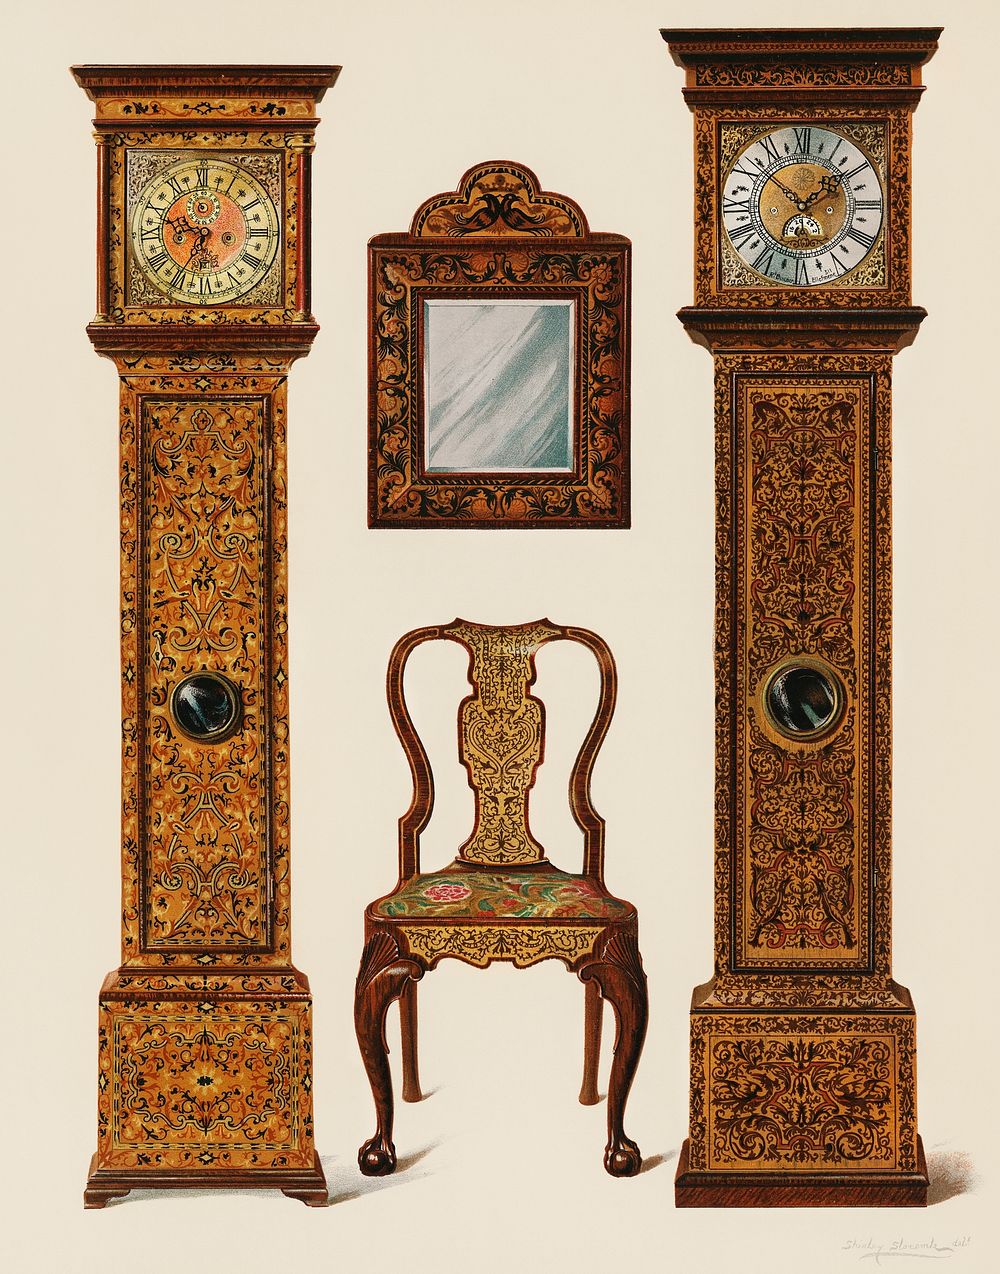 An illustration of Edwardian furniture (1905) drawn by Shirley Slocombe, a beautifully detailed design of a wooden chair…